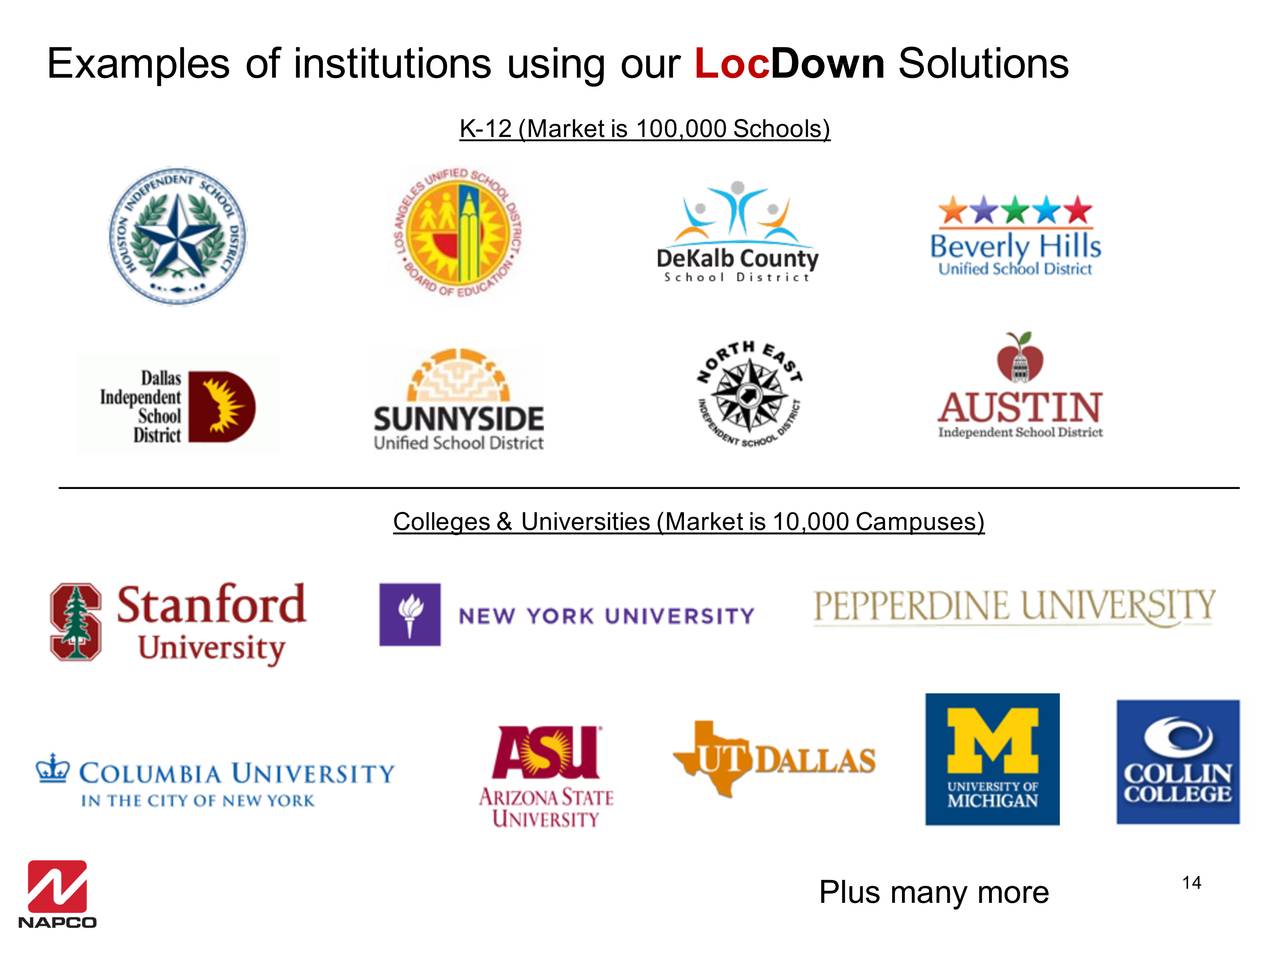 Examples of institutions using our LocDown Solutions